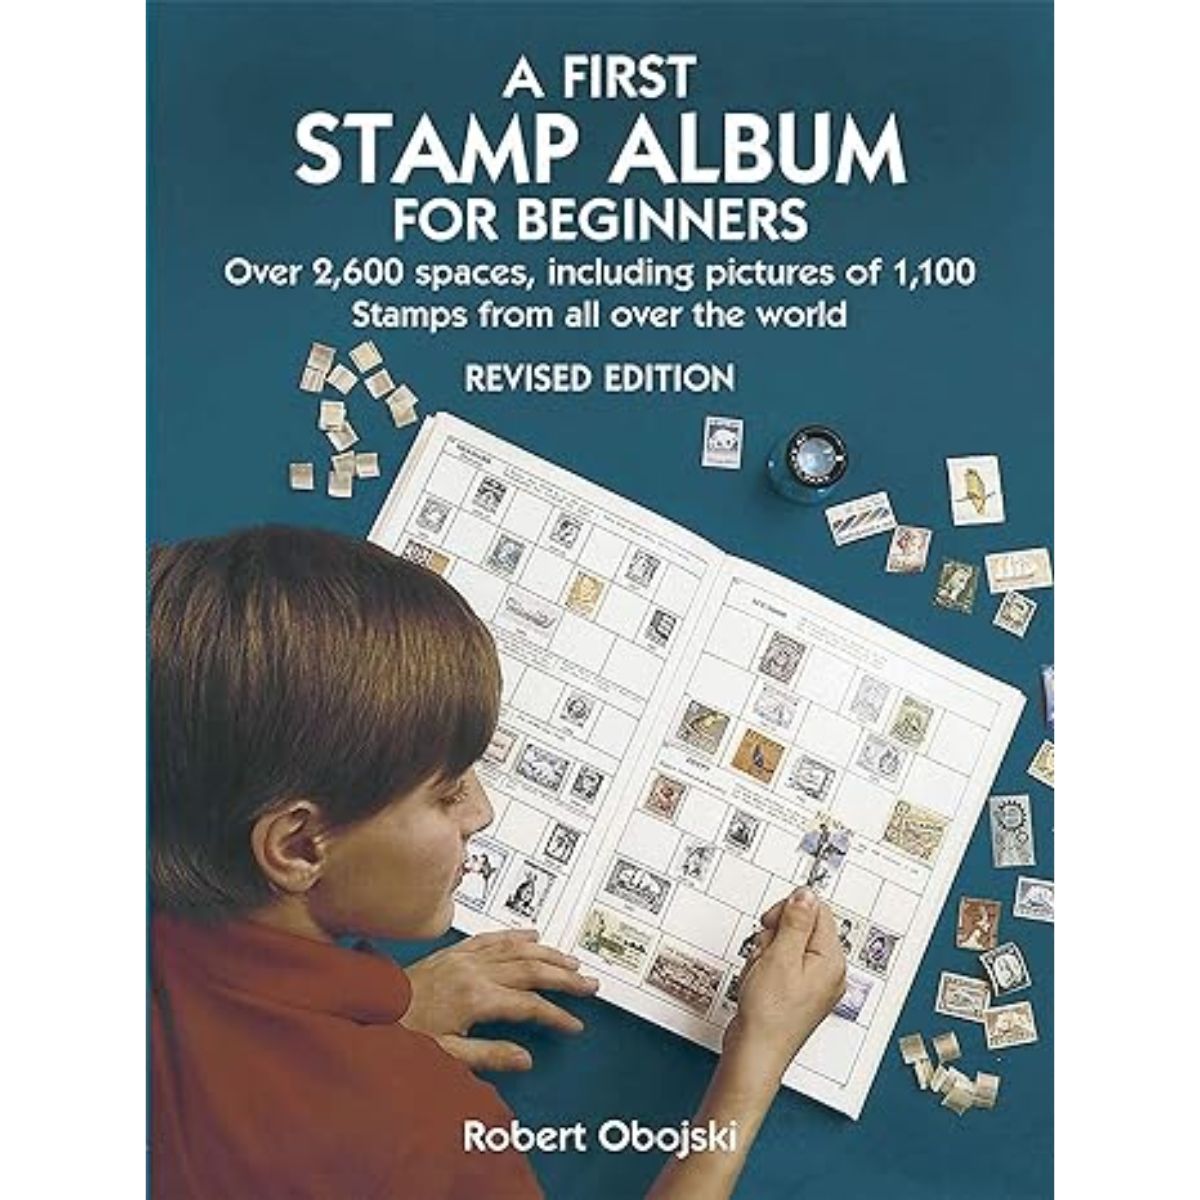 Retro First Stamp Album for Beginners: Revised Edition